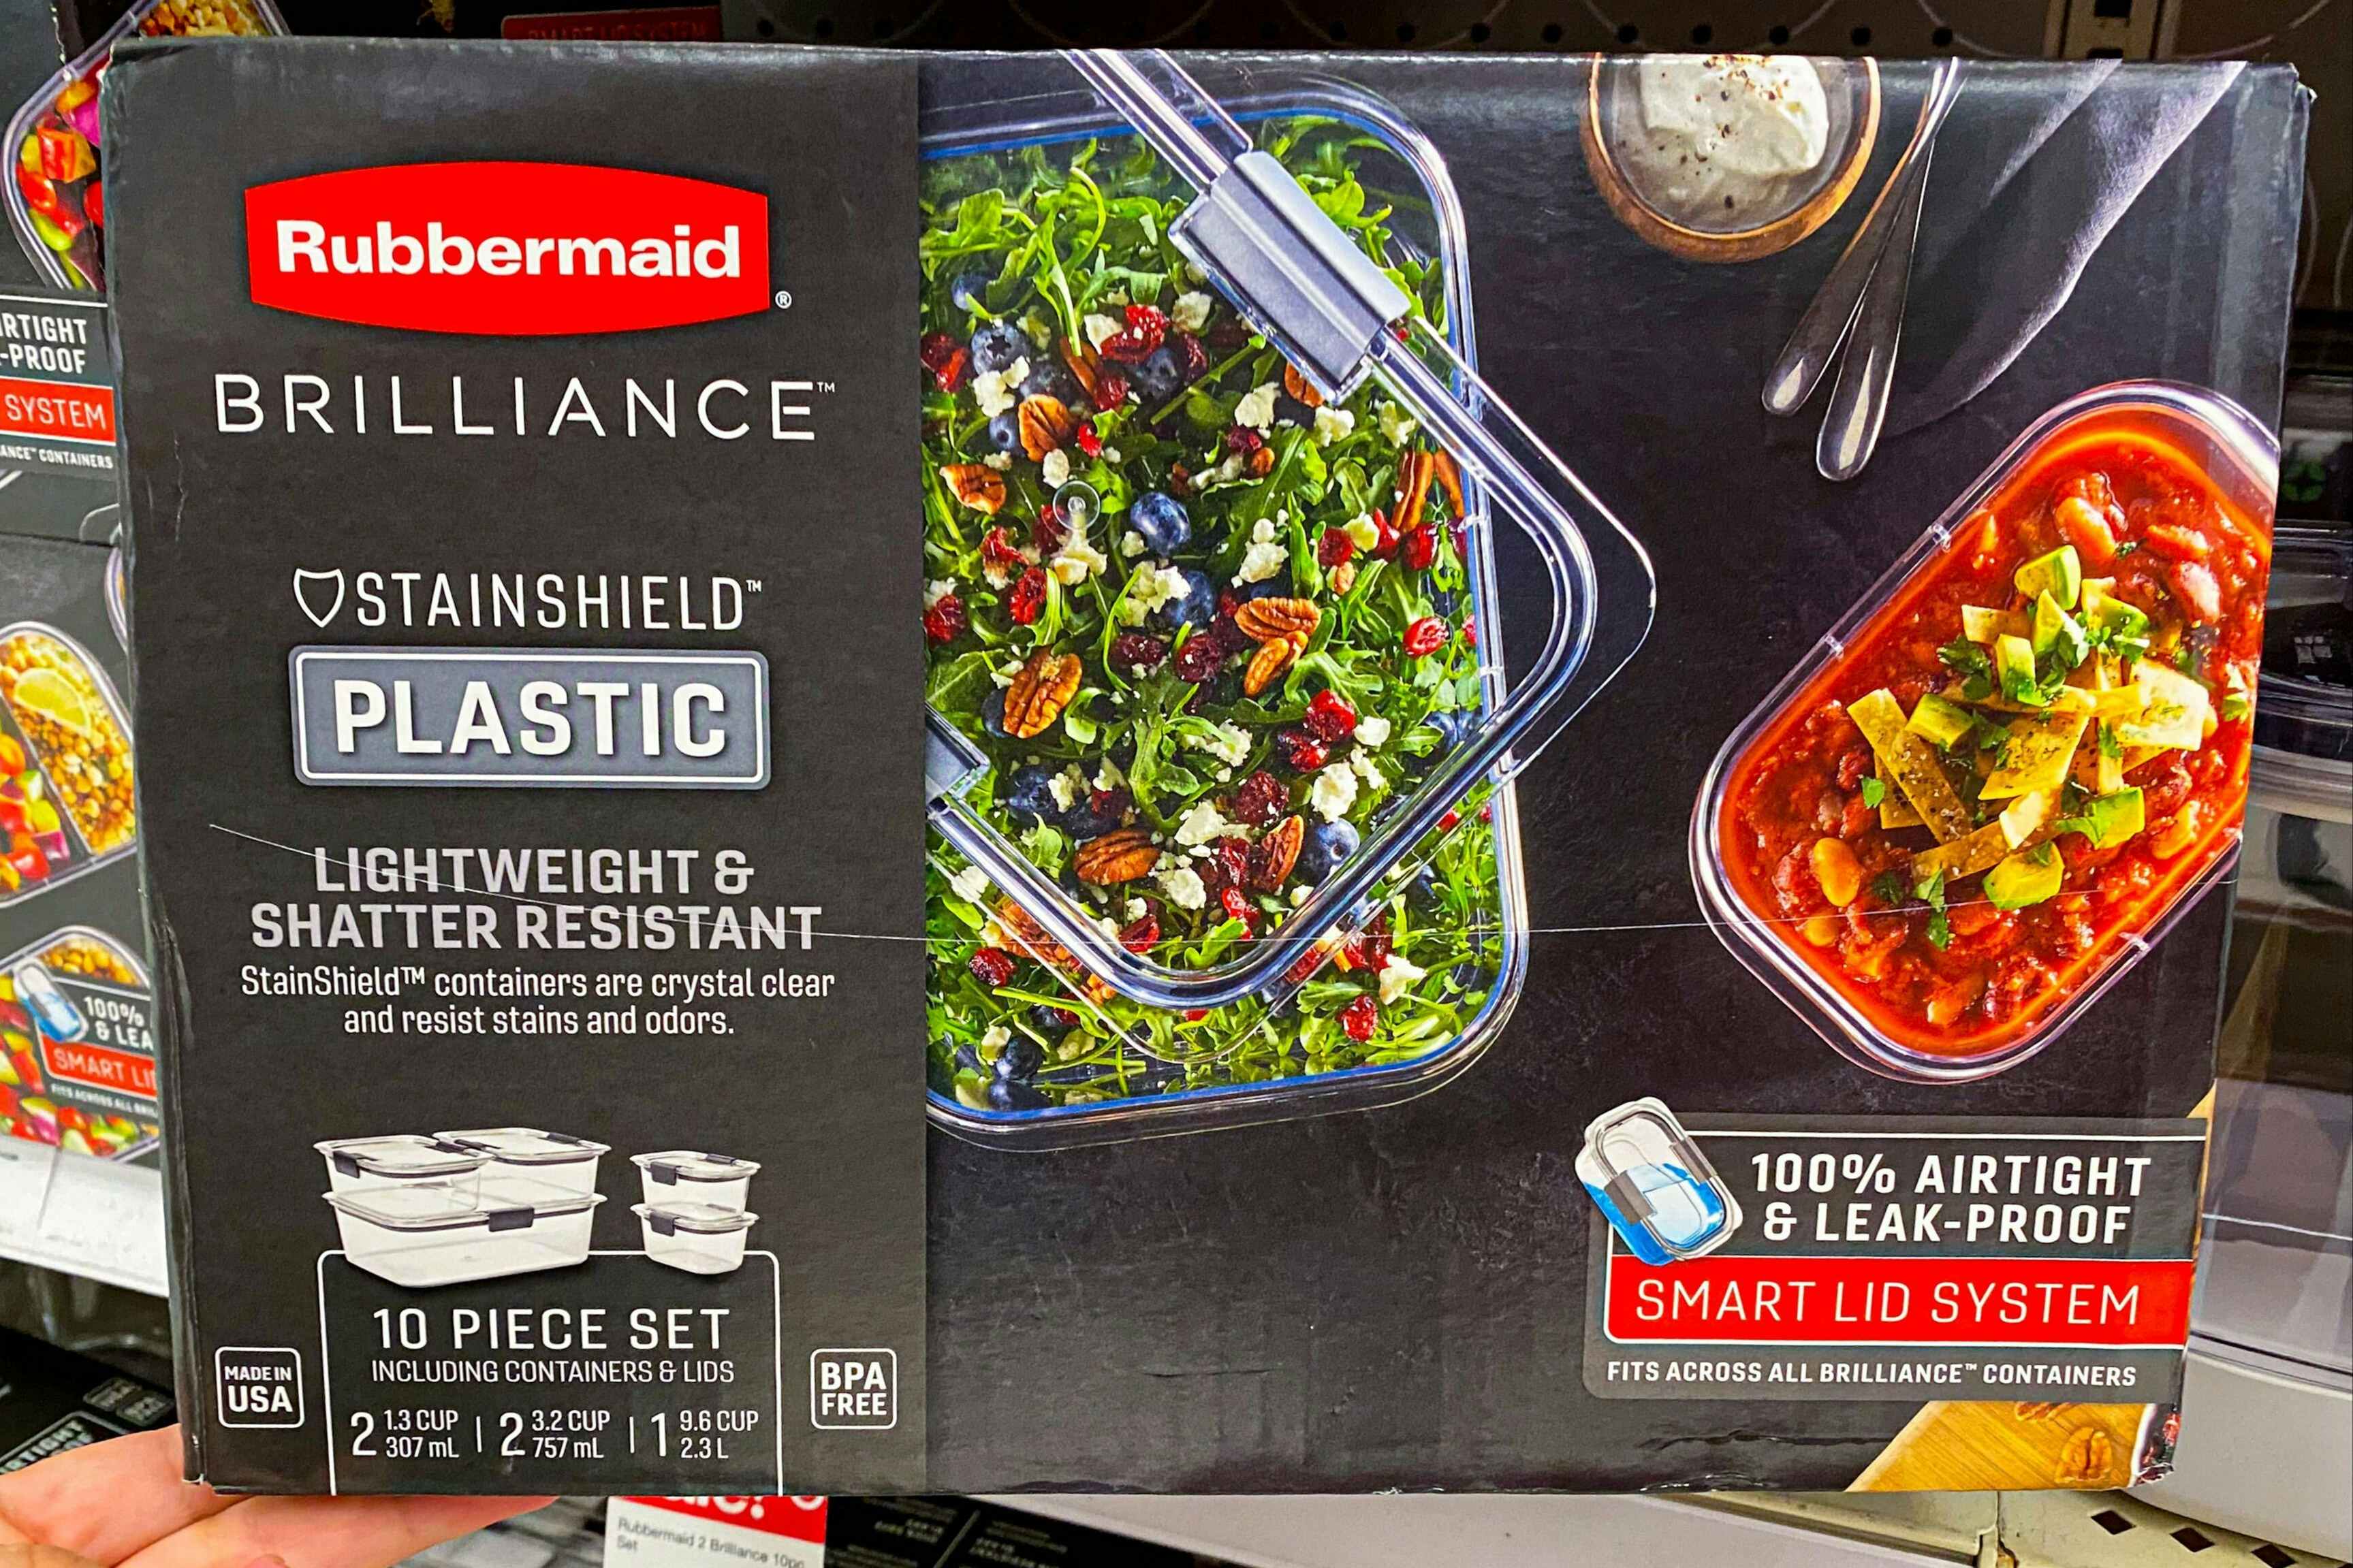 Rubbermaid Brilliance Airtight Storage Sets, as Low as $5.64 at Target